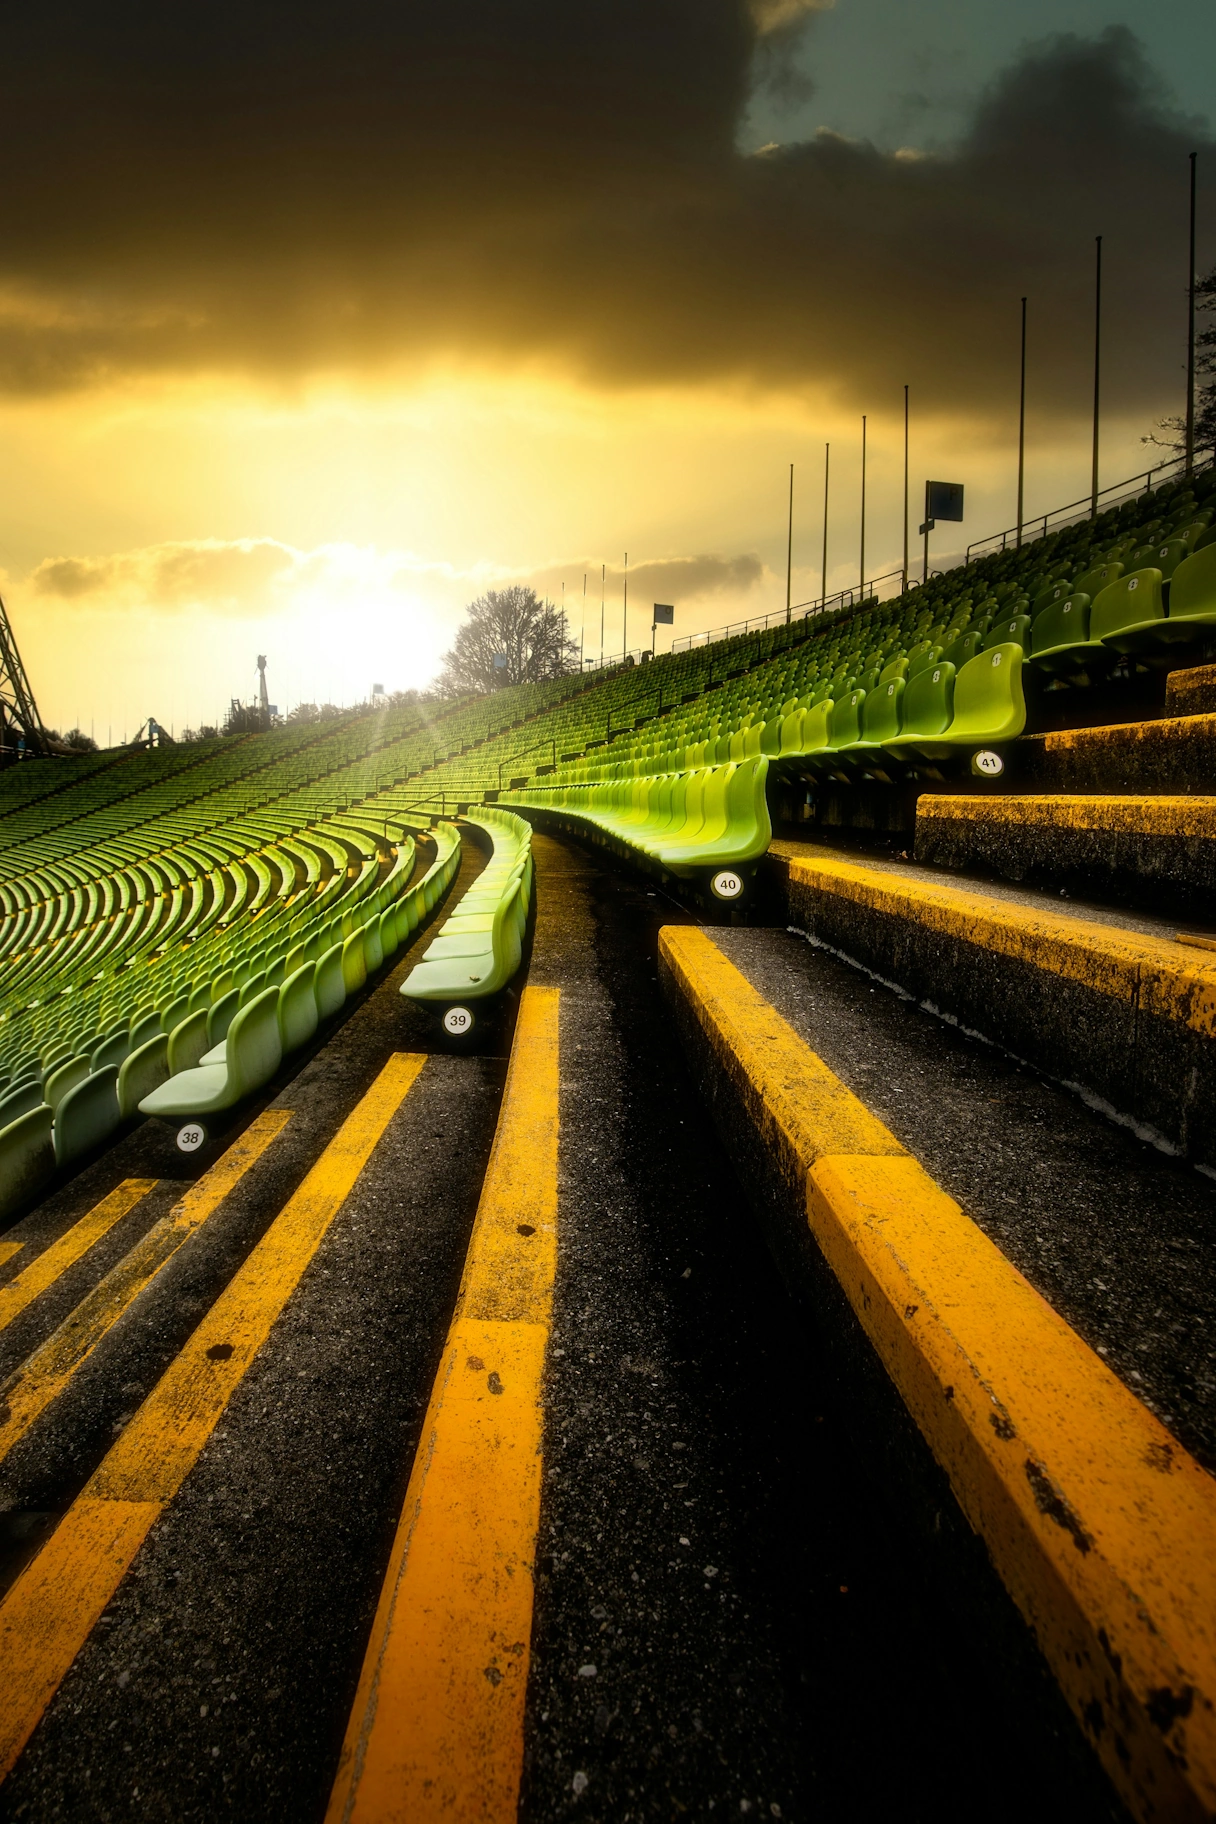 Olympic Stadium in Munich, view of the seats with sunset